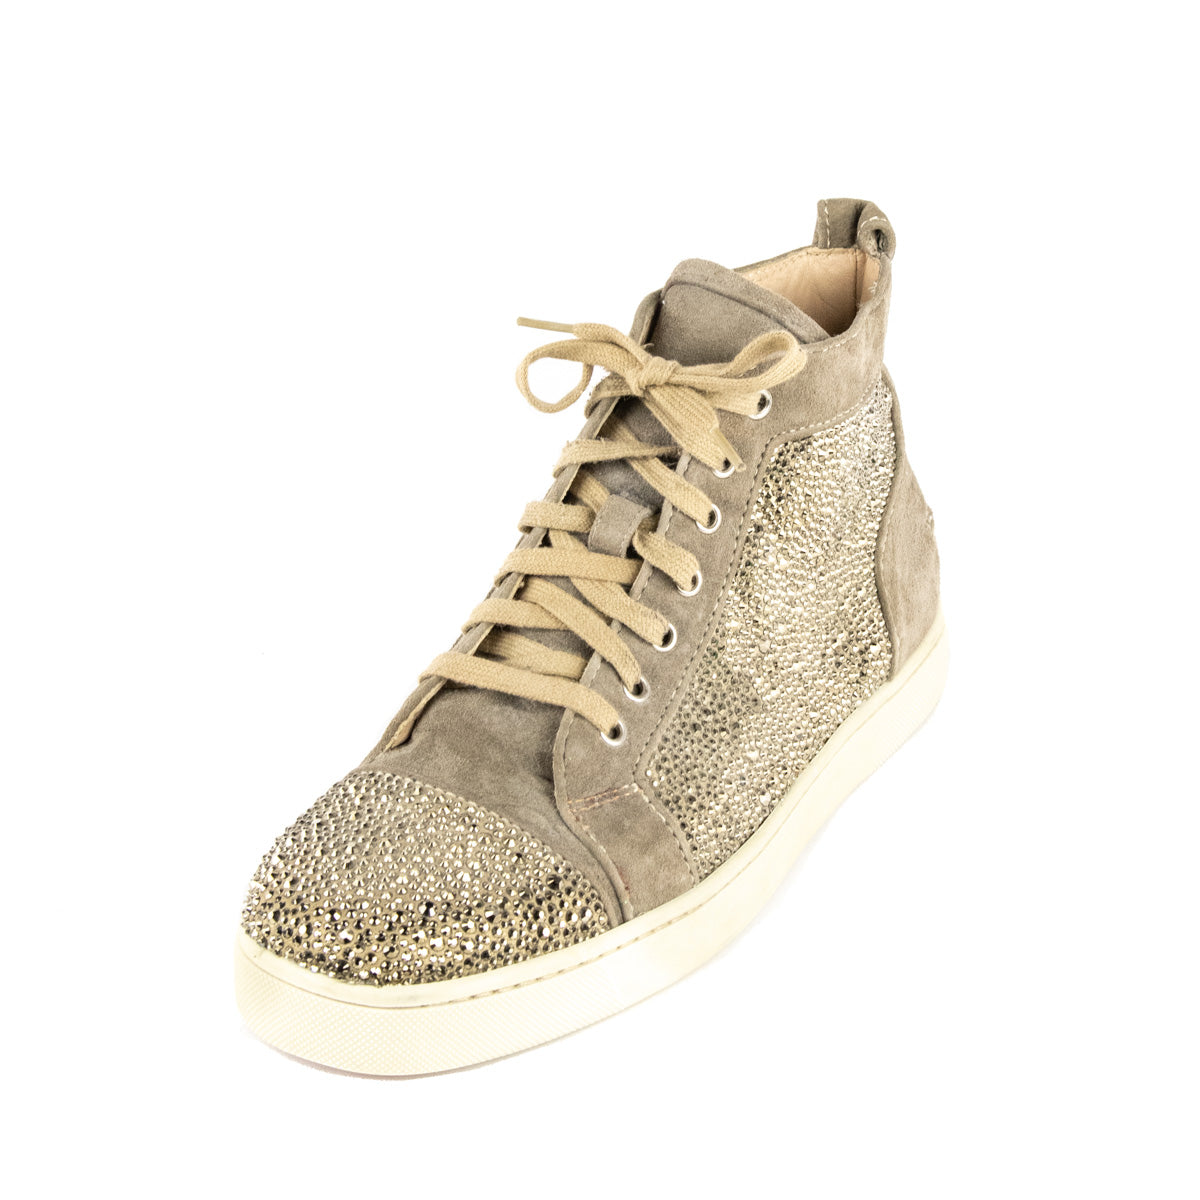 Christian Louboutin Taupe Suede Louis Crystal Embellished High Top Sneakers Size US 12 | EU 42 - Love that Bag etc - Preowned Authentic Designer Handbags & Preloved Fashions